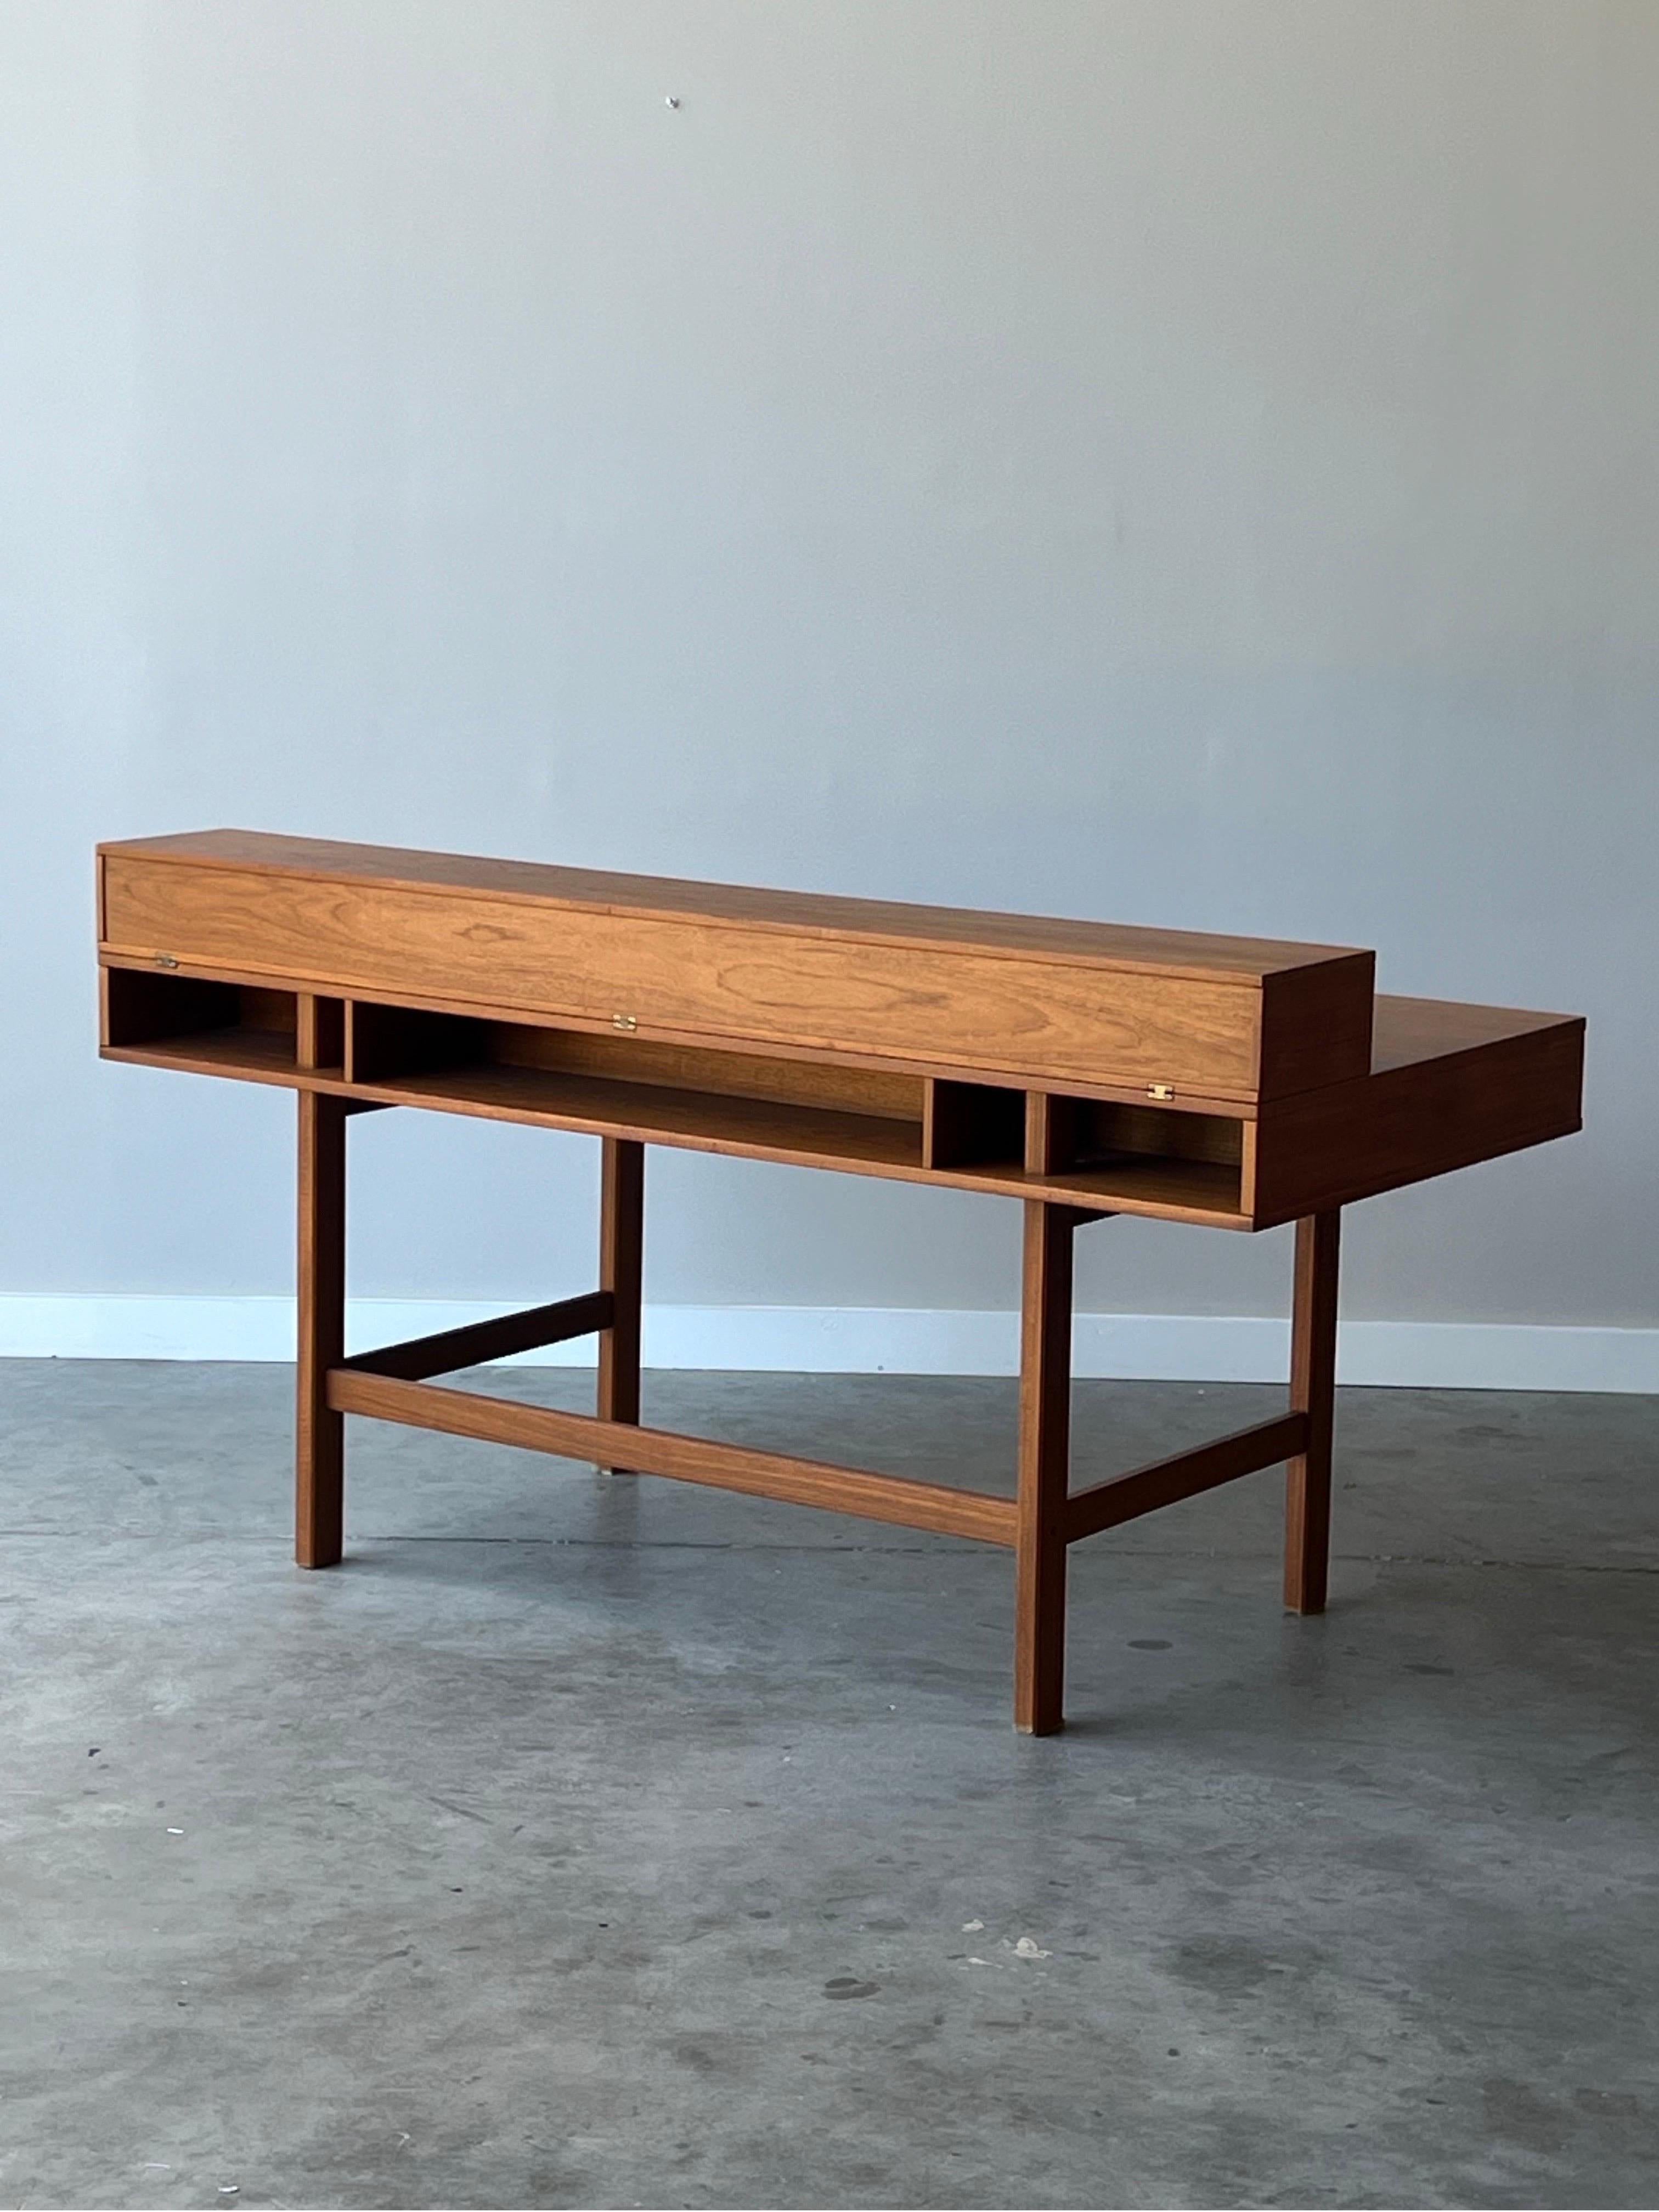 Mid-century Danish teak executive desk with flip-top mechanism. Designed by Peter Løvig Nielsen circa 1970s. This iconic desk has become well known within the world of mid-century design and for good reason.

The useable surface area atop the desk